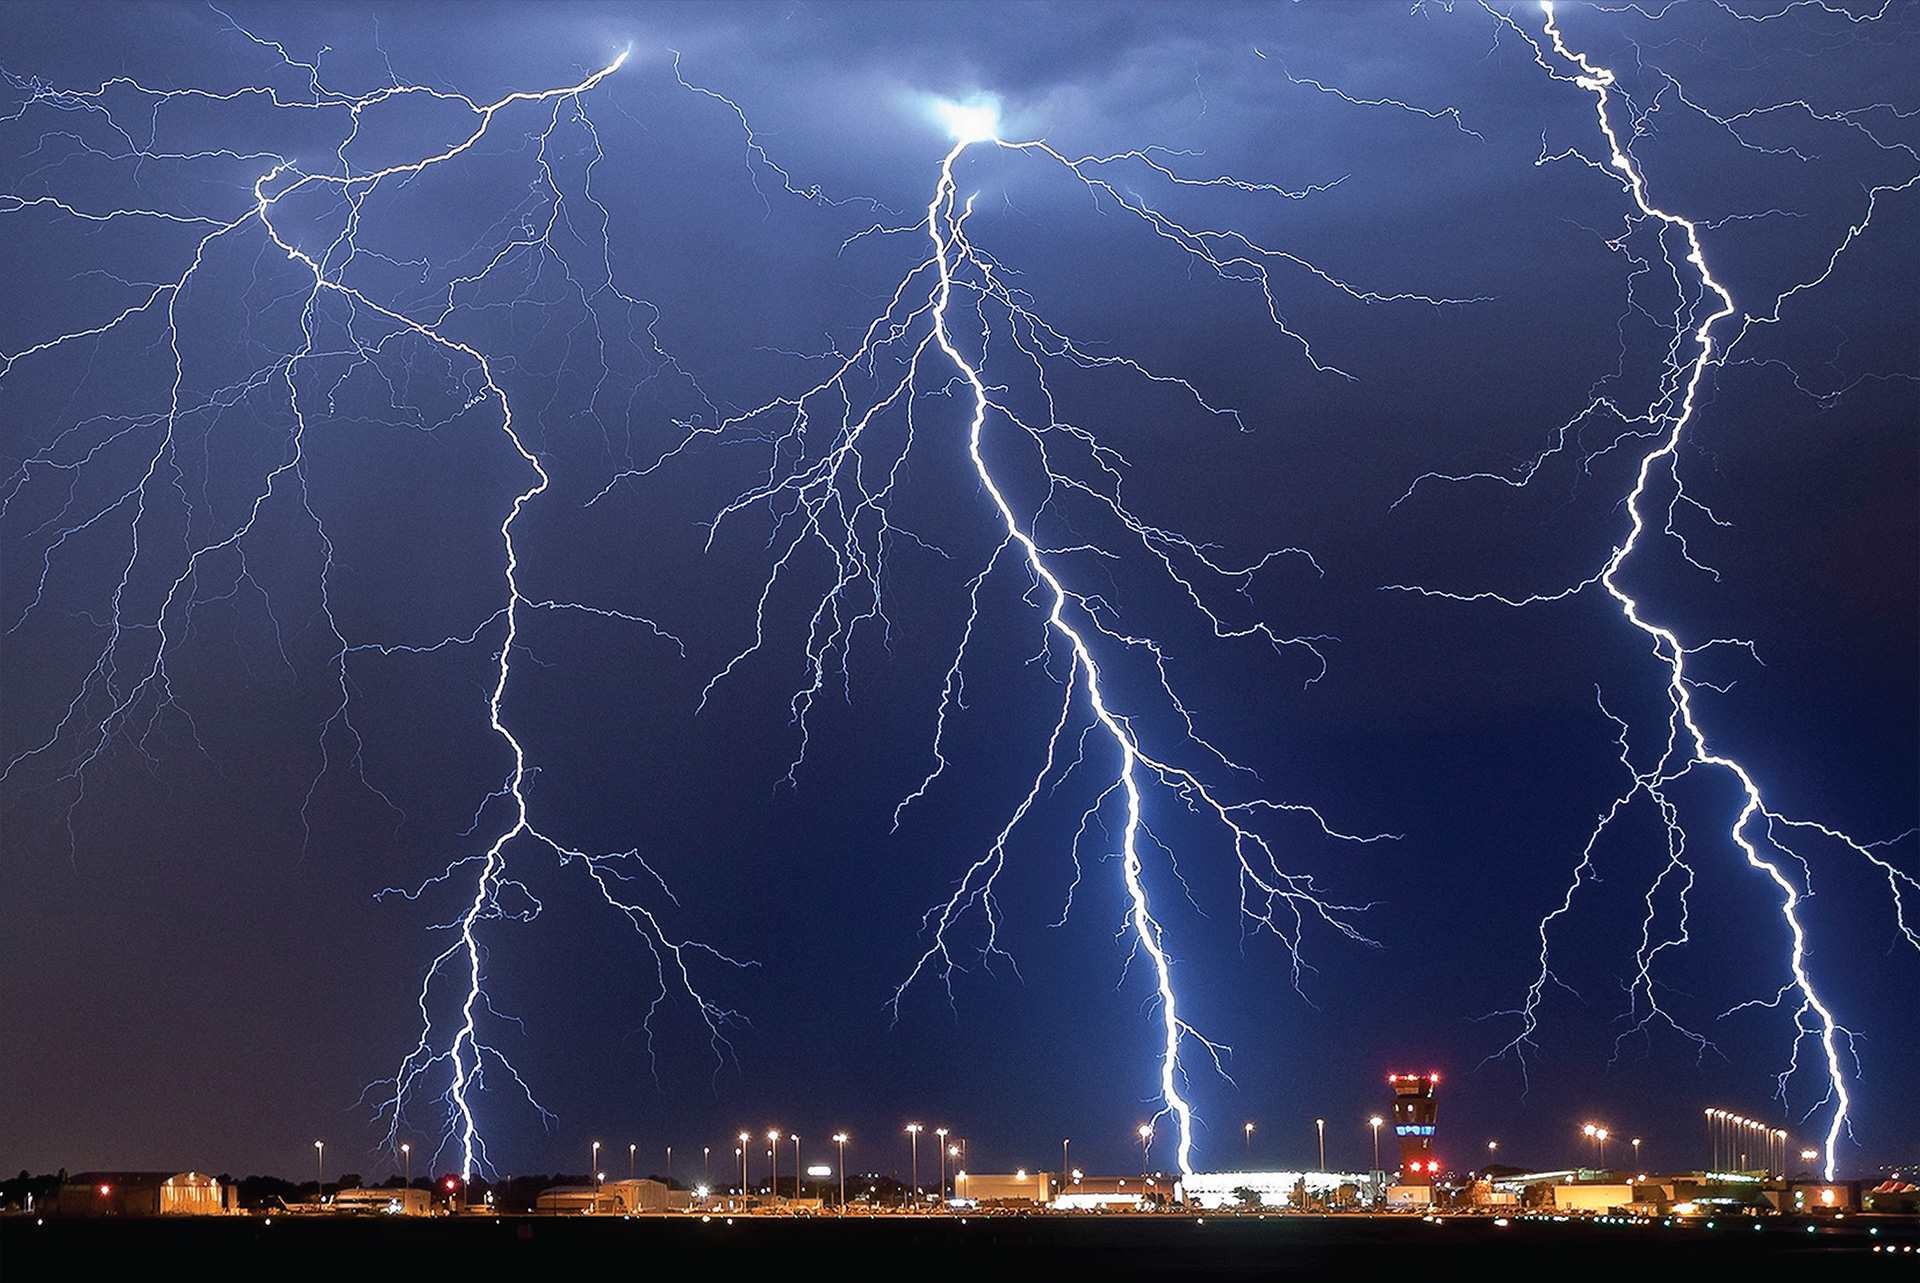 Three branching lightning strikes in a night sky over airport building and control tower